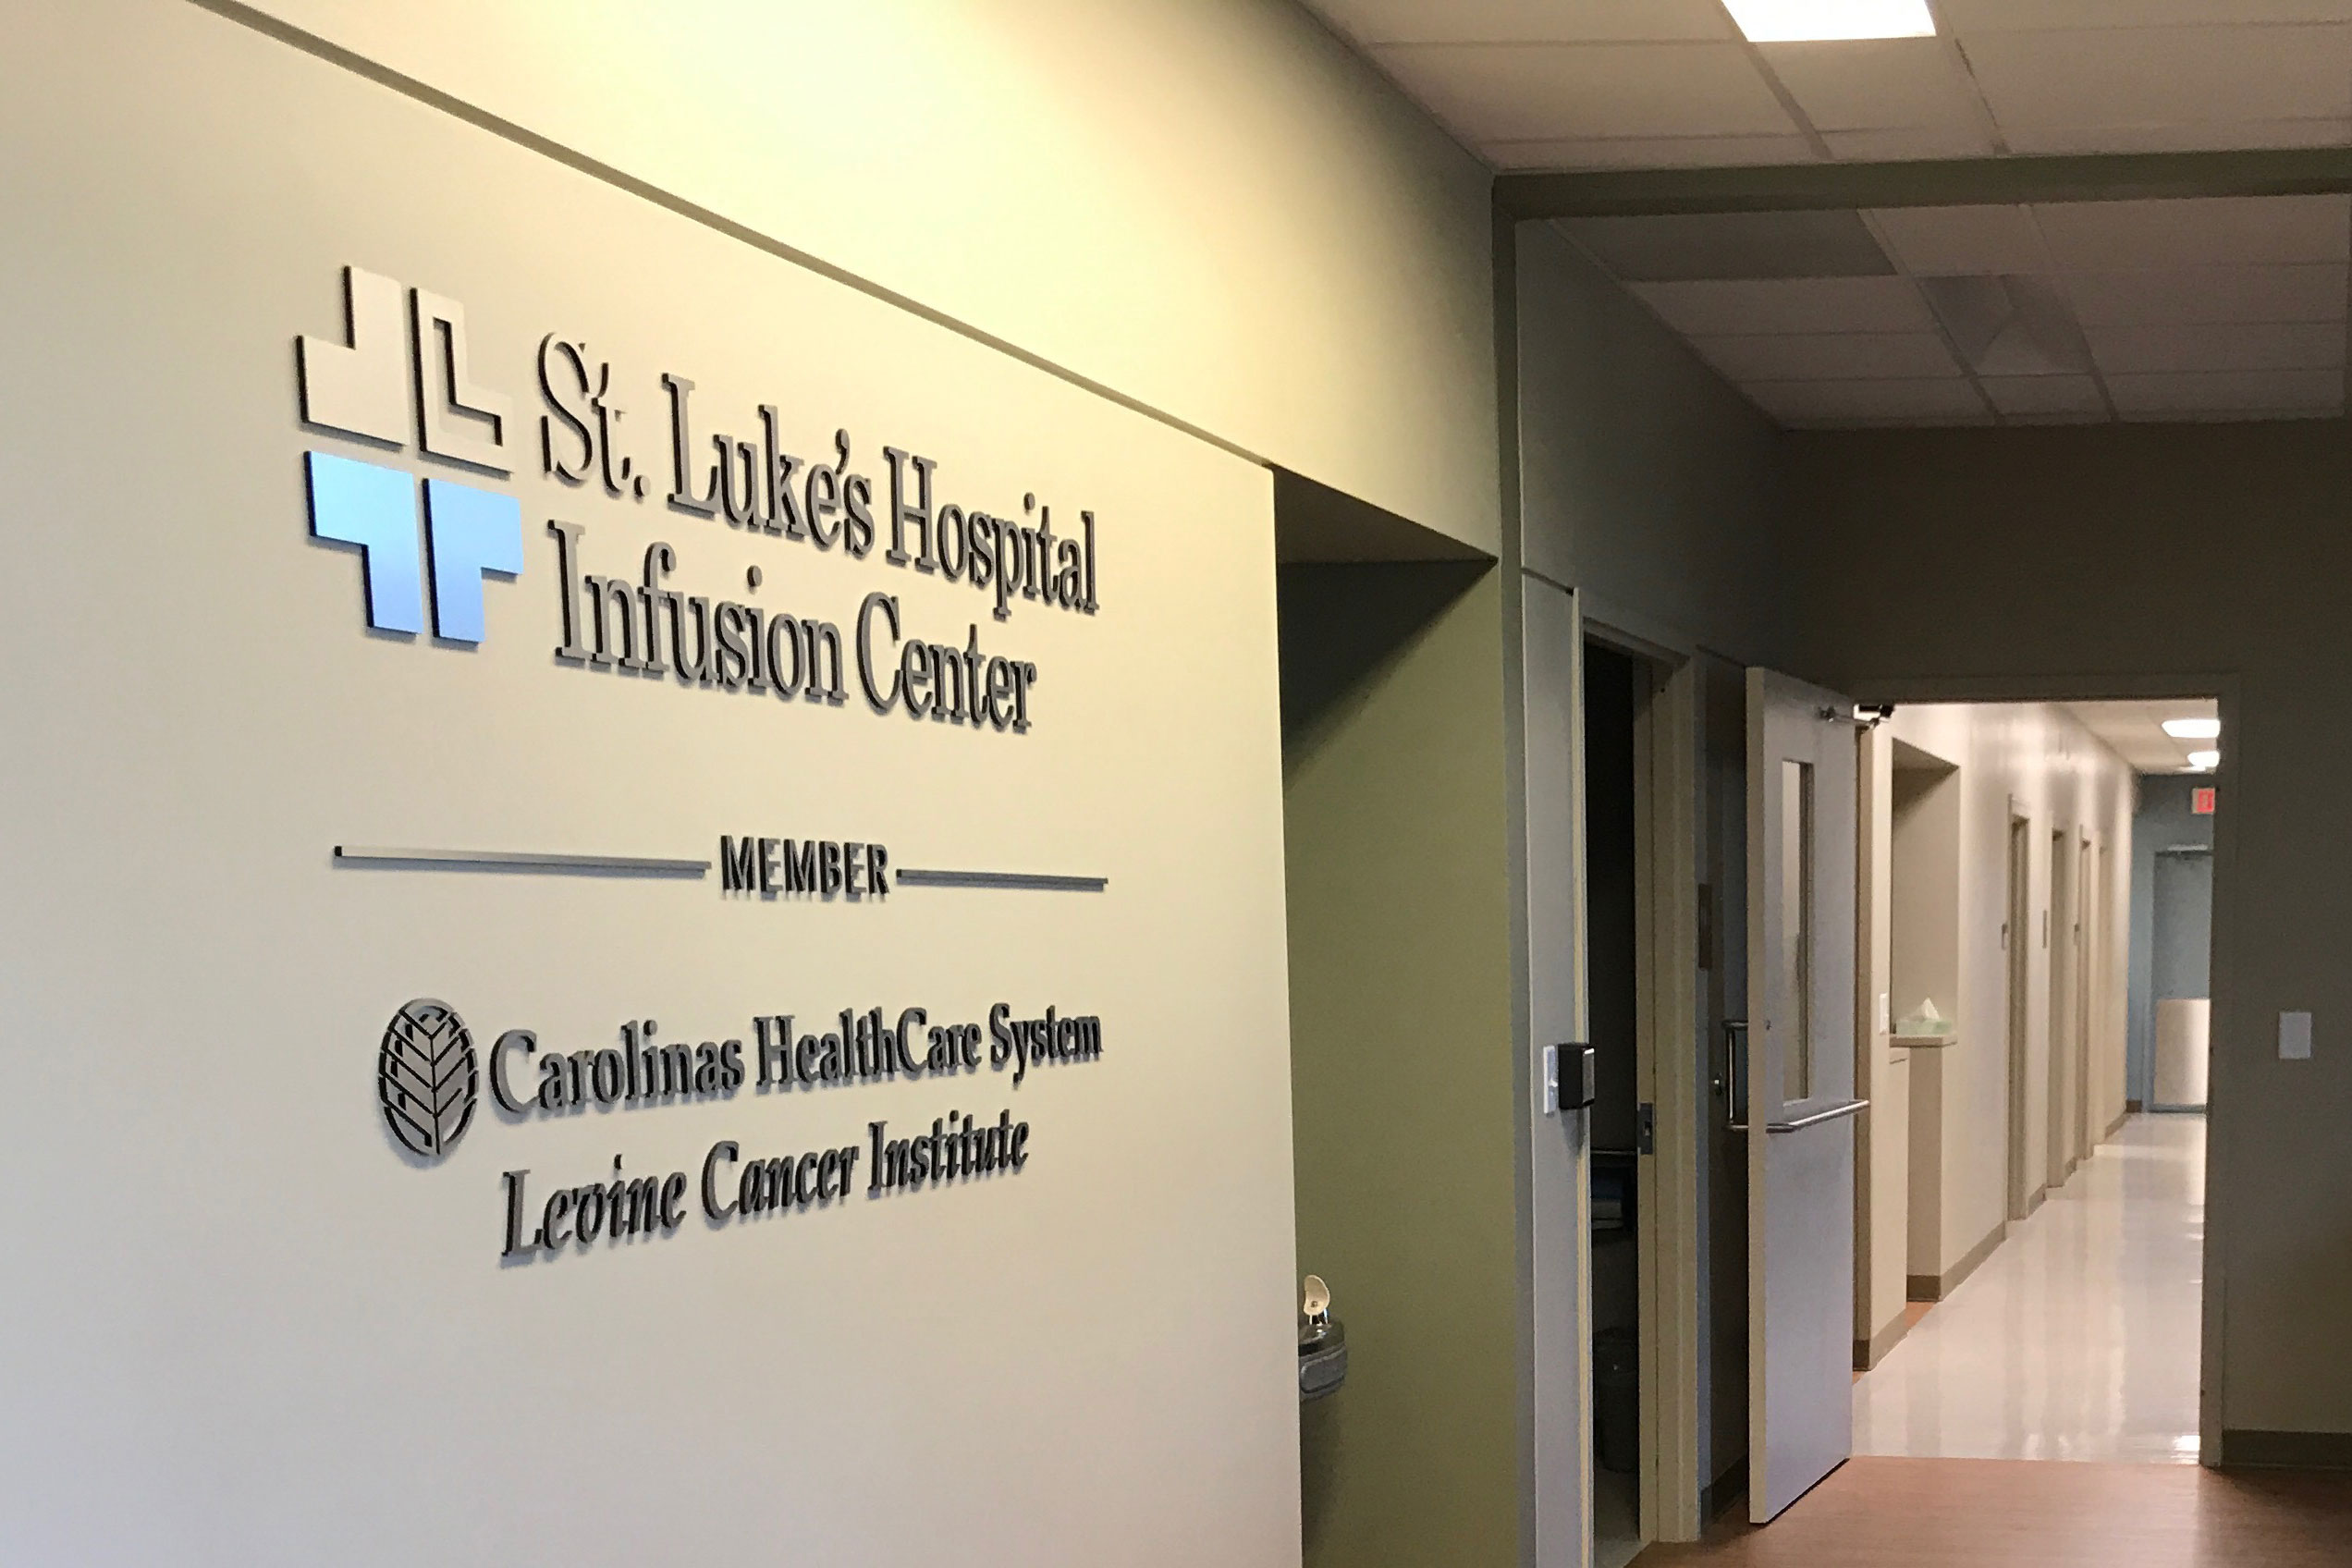 Image of the St. Luke’s Hospital Infusion Center project.